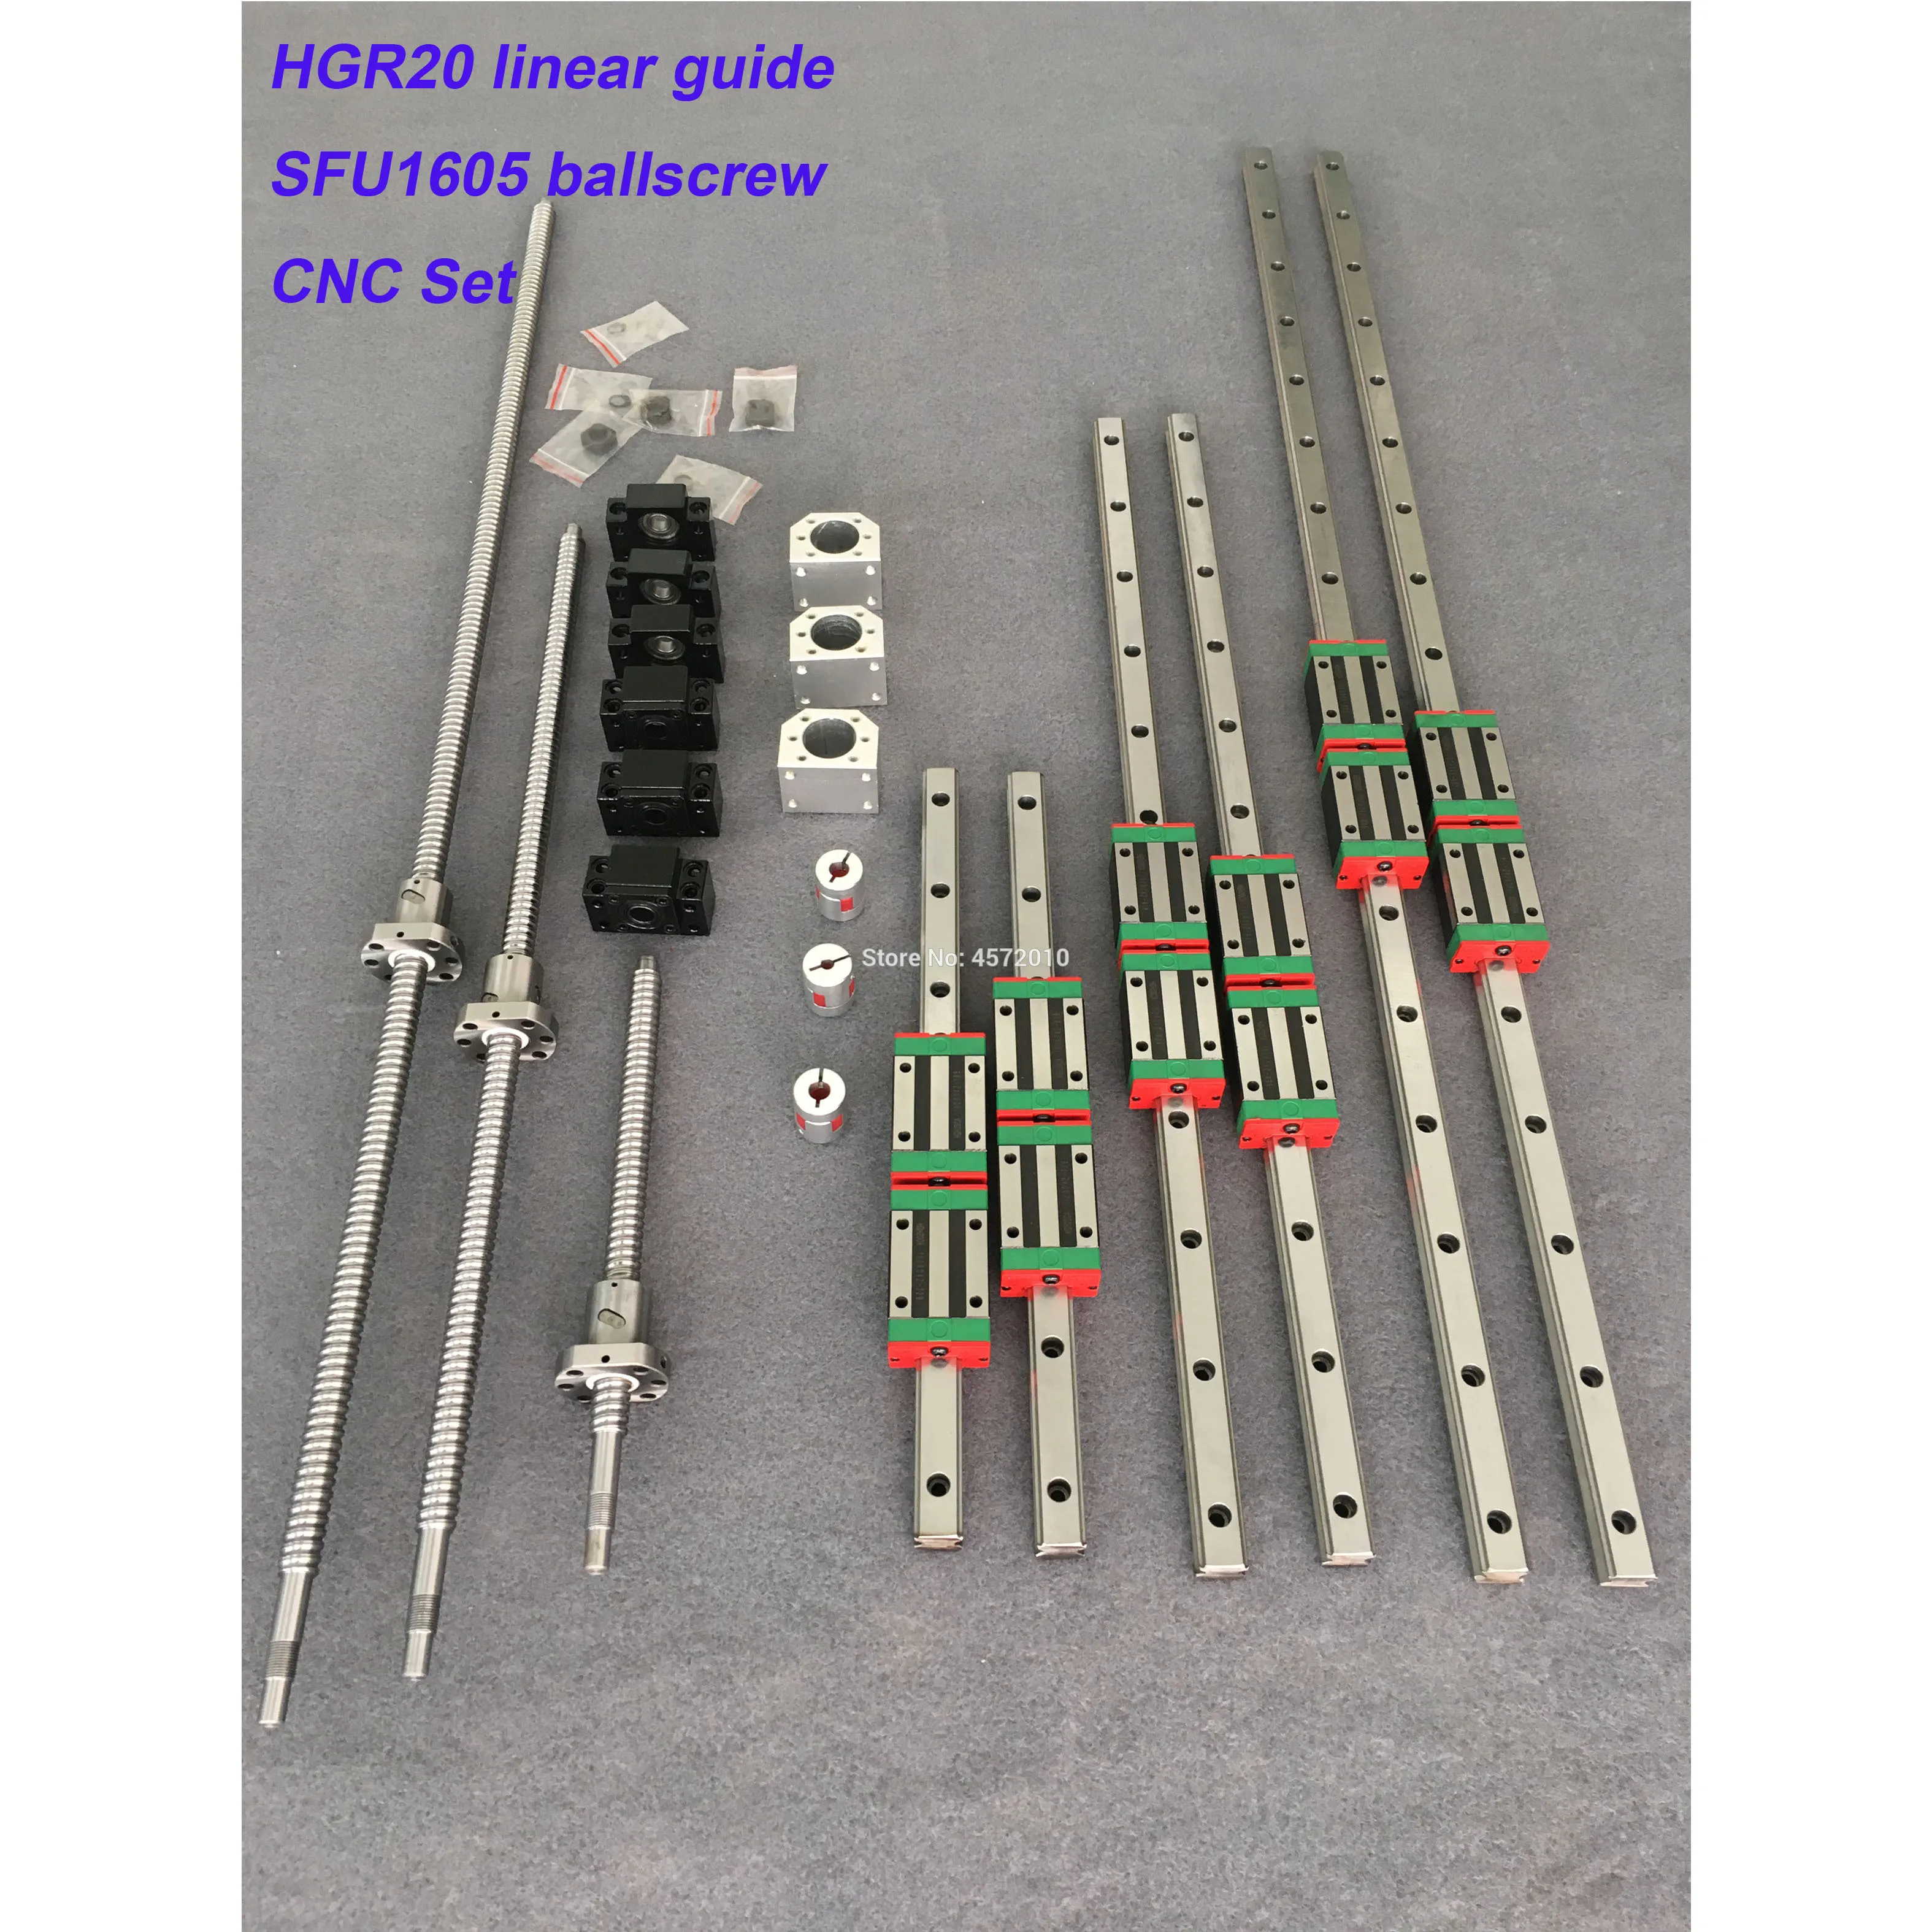 

HGR20 Square 3 axis 4aixs CNC guide 20mm linear rails linear guide HGH20 16mm ball screw SFU1605/1610 set for CNC router